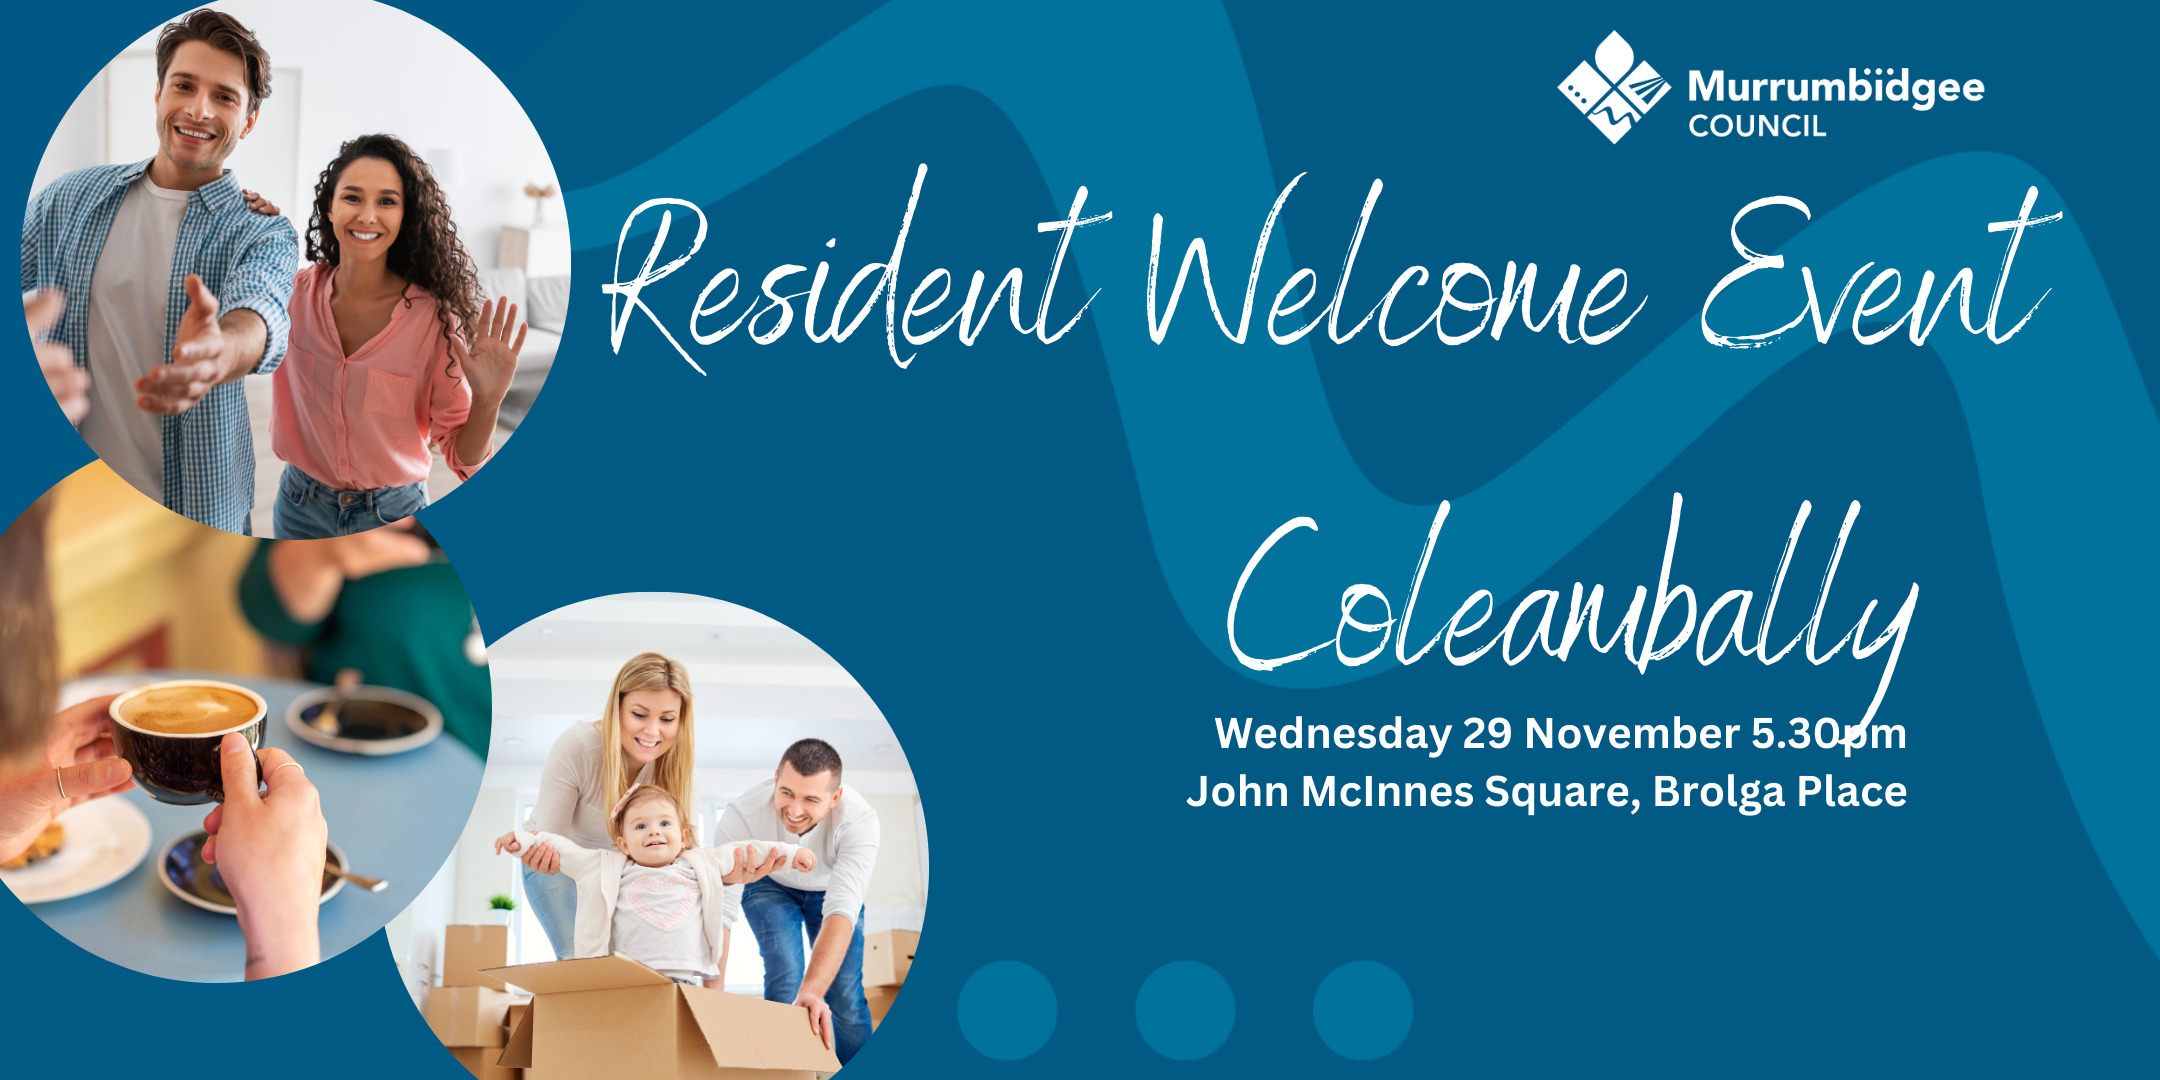 Coleambally - New Resident Welcome Event